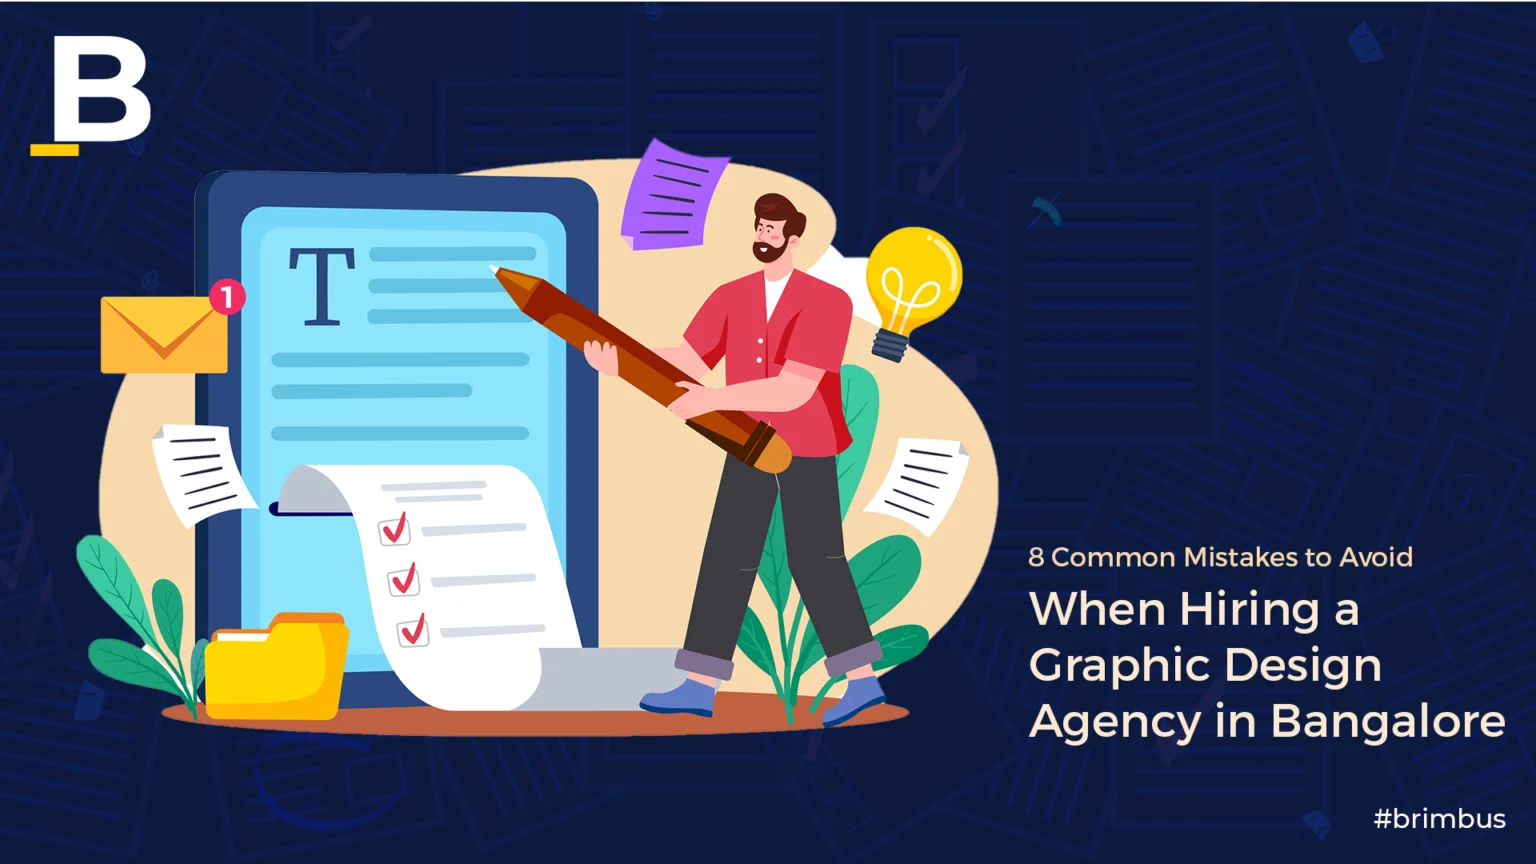 Graphic Design Agency in Bangalore